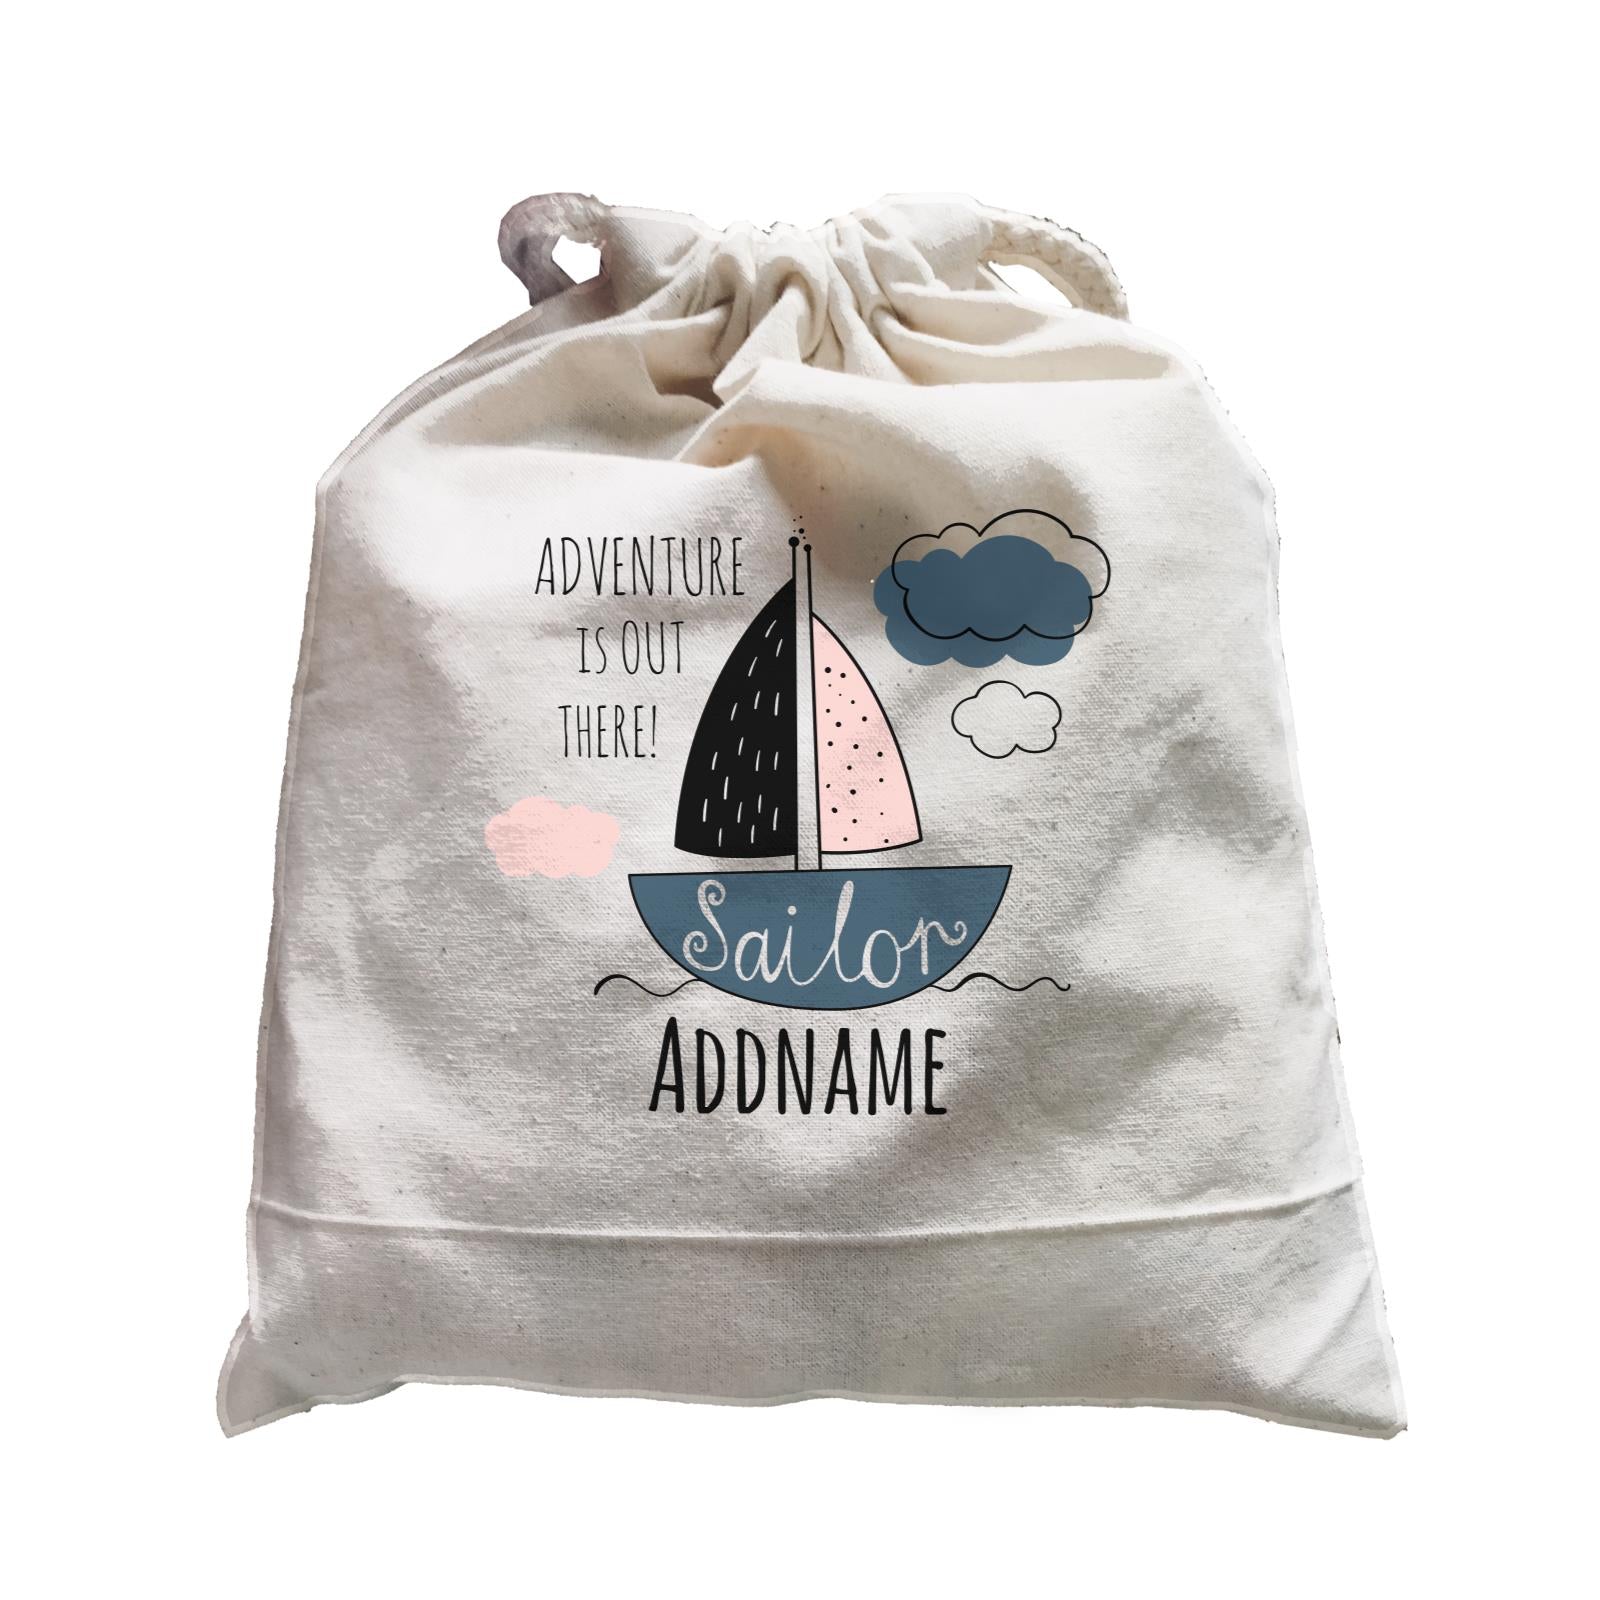 Drawn Ocean Elements Sailor Adventure is Out There Addname Satchel